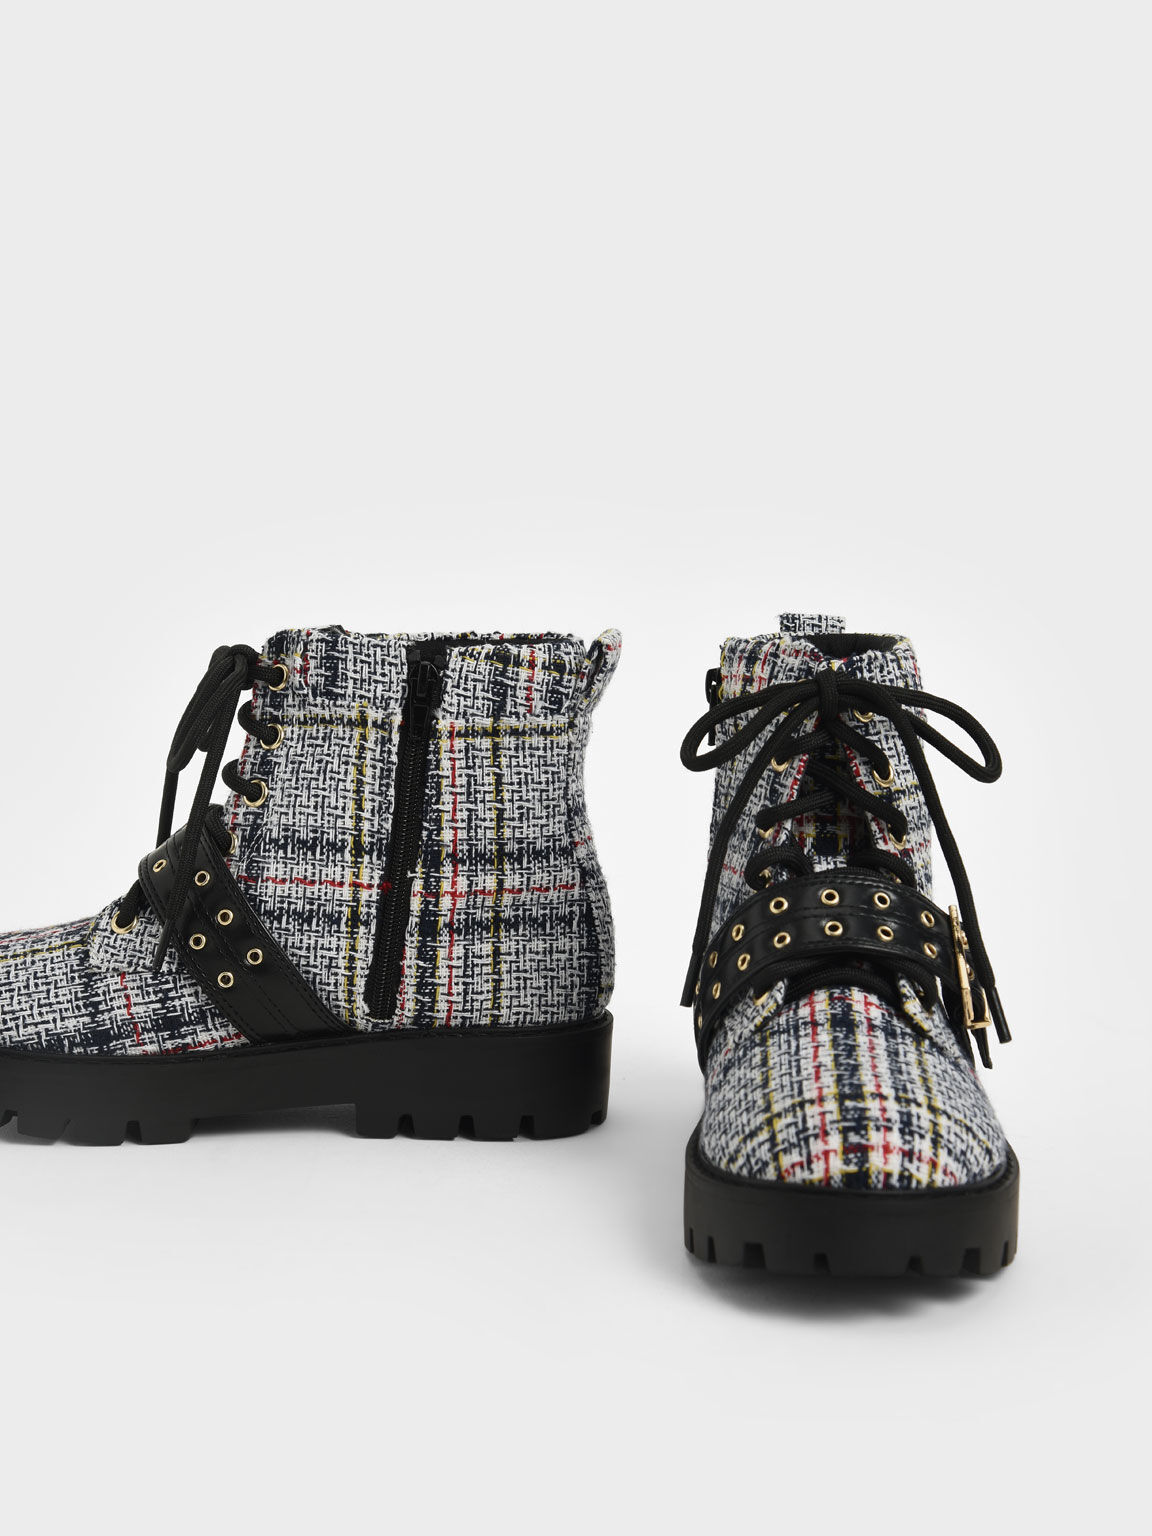 Girls' Tweed Lace-Up Ankle Boots, Dark Blue, hi-res